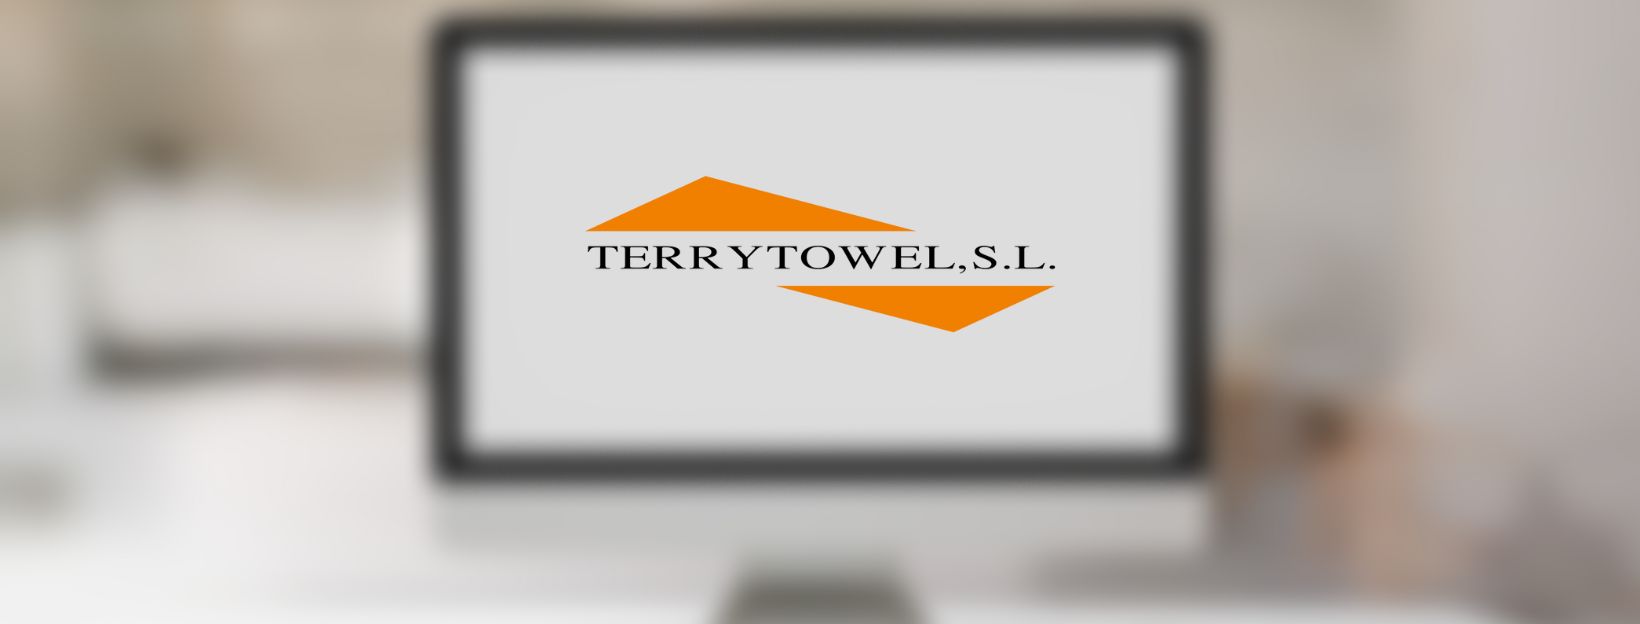 SEO for Terrytowel S.L. online store.